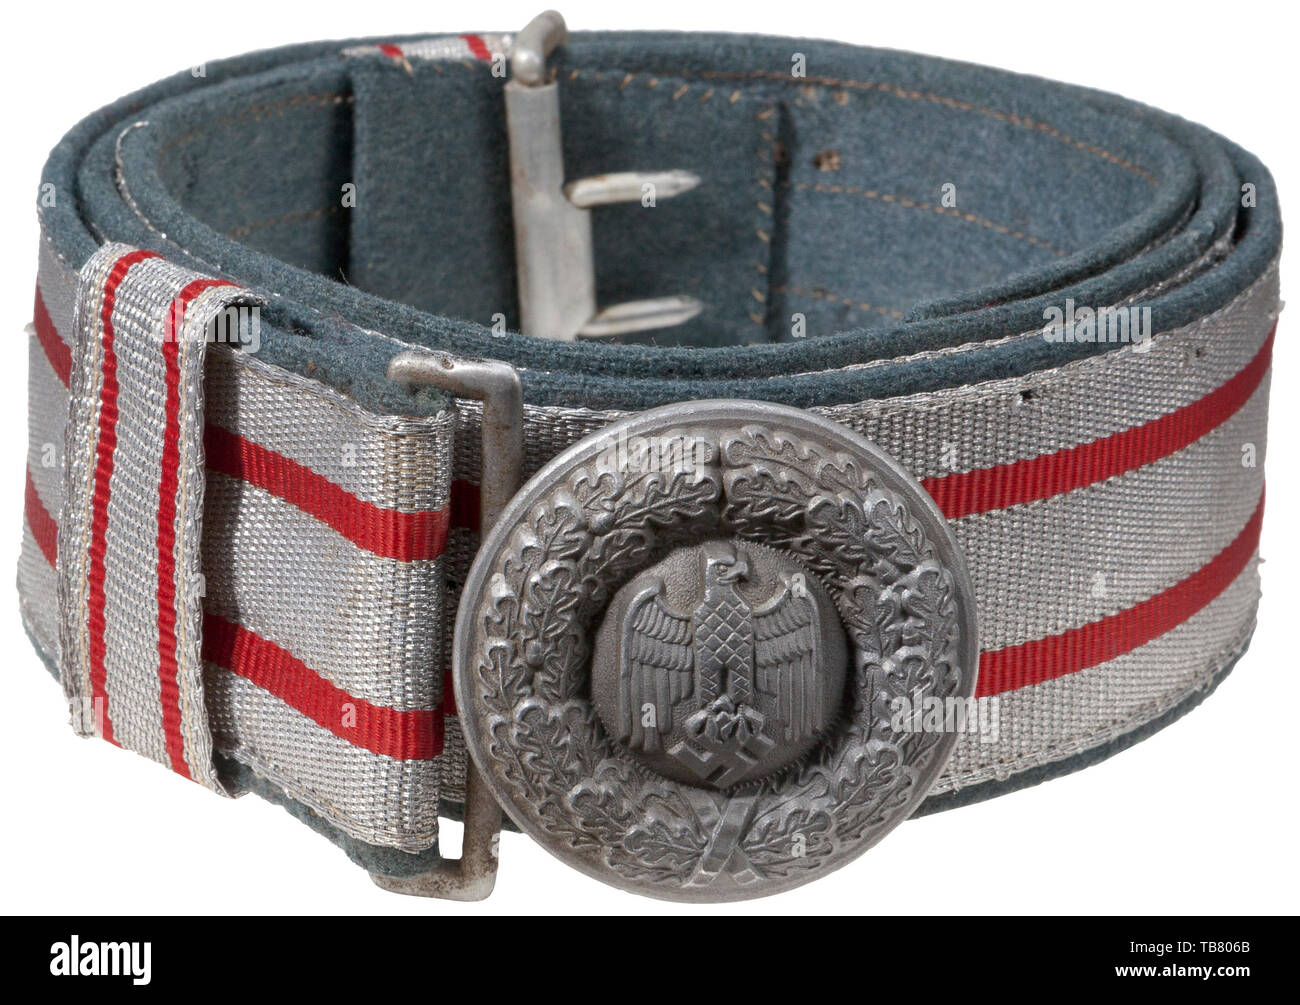 THE JOHN WAHL BELT AND BUCKLE COLLECTION, An Army Band Leader Brocade Belt and Buckle, Stamped aluminium 50 mm diameter round buckle, burnished finish, reverse unmarked. 45 mm field-grey wool backed aluminium/silver woven brocade with two red stripes and two sliding, vertical 22 mm matching keepers. Reverse exhibits significant mothing. Missing leather size adjustment tongue. Aluminium catch present. Length 110 cm., Additional-Rights-Clearance-Info-Not-Available Stock Photo